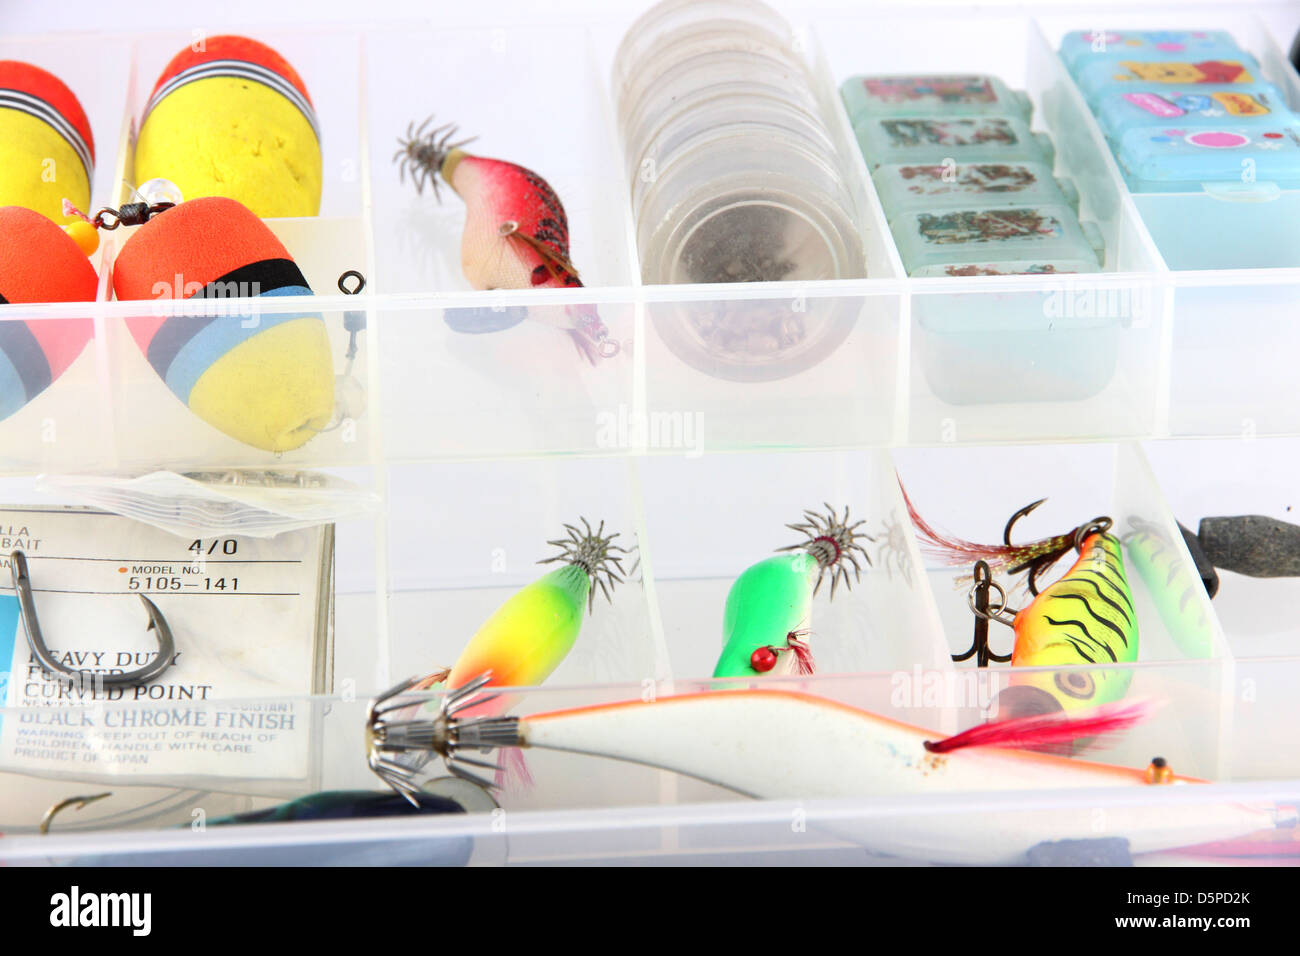 The Fishing accessories in the white box. Stock Photo